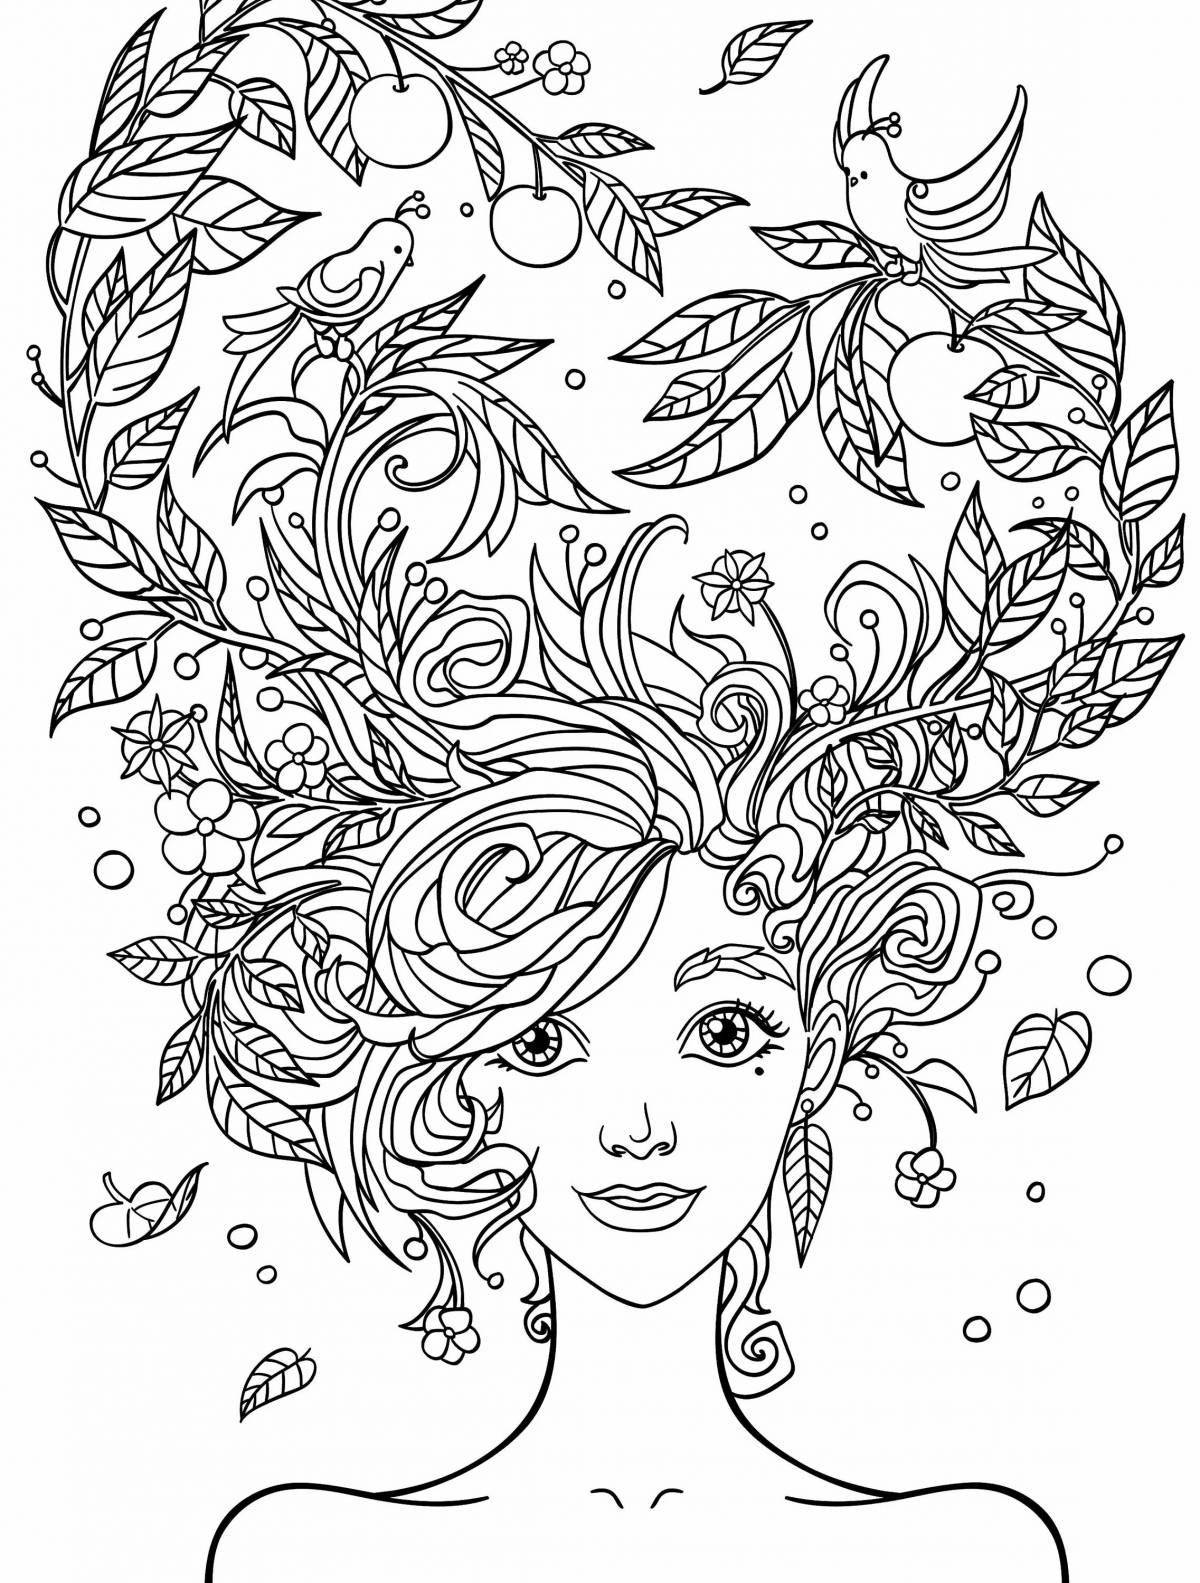 Peaceful anti-stress coloring page 18